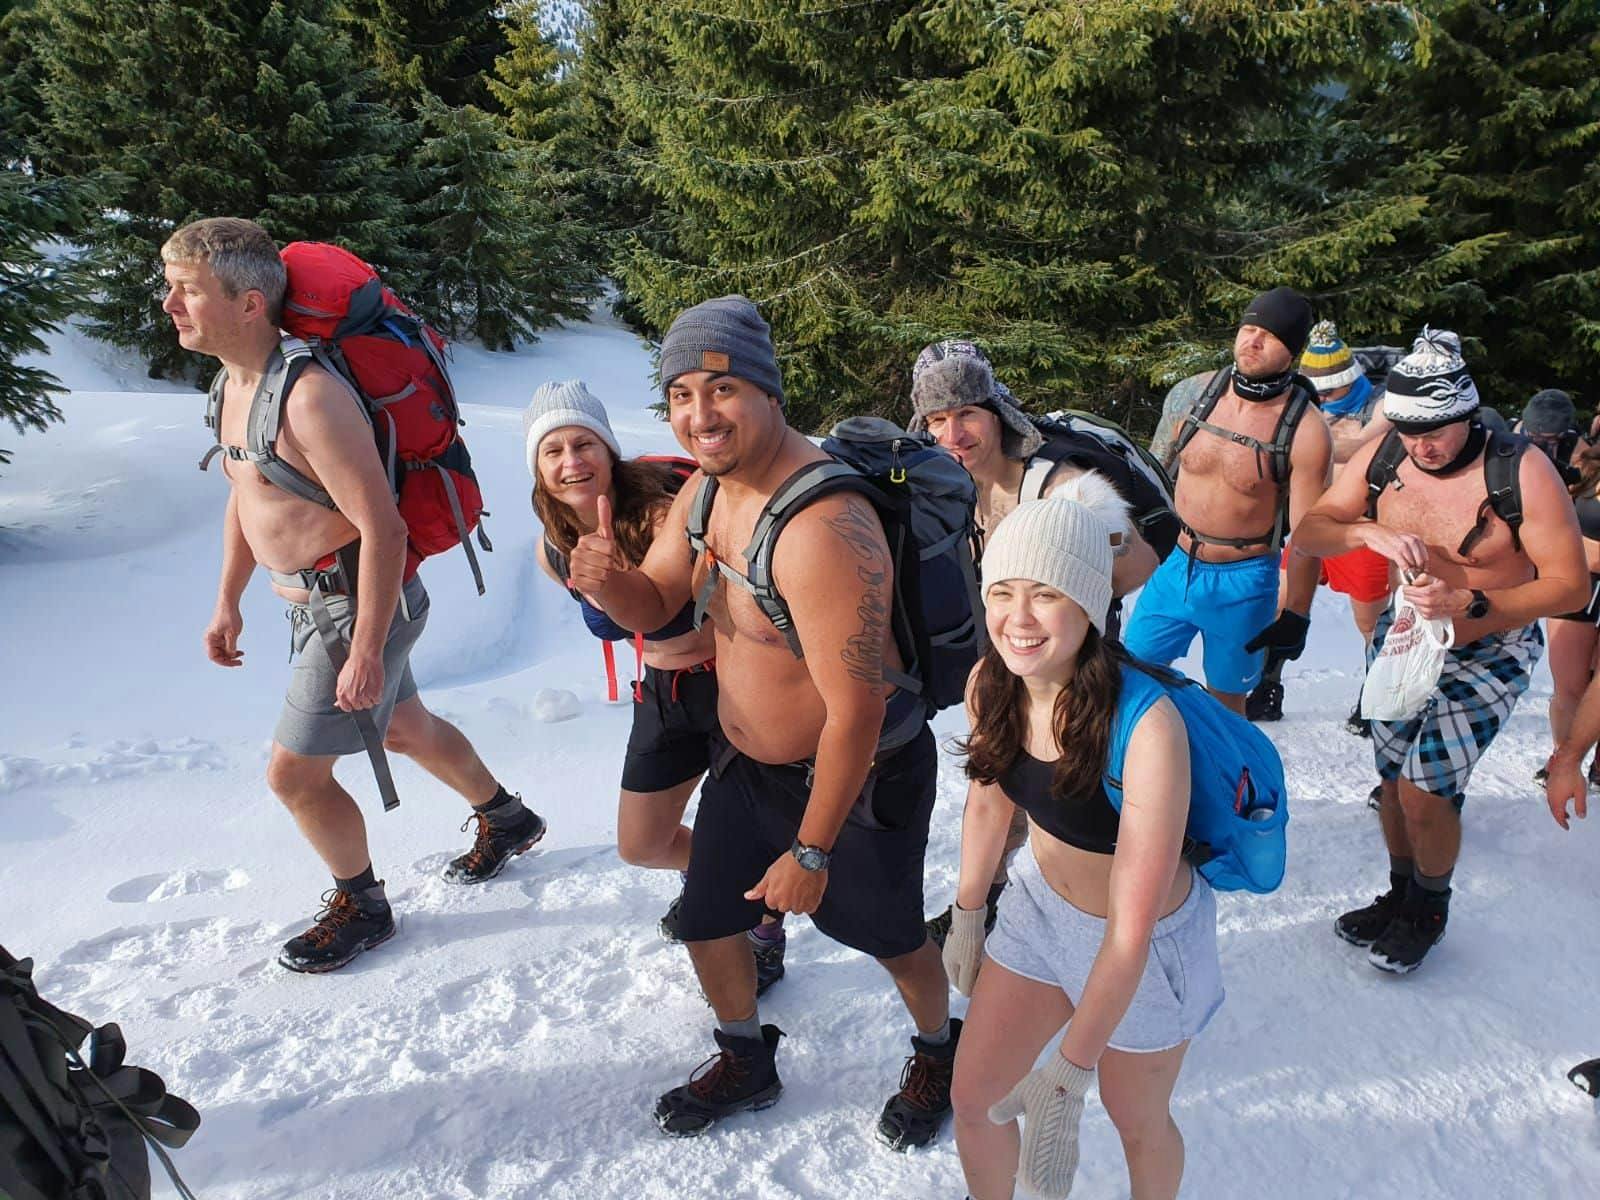 Group of Hikers in Shorts in the Snow with the Wim Hof method. 